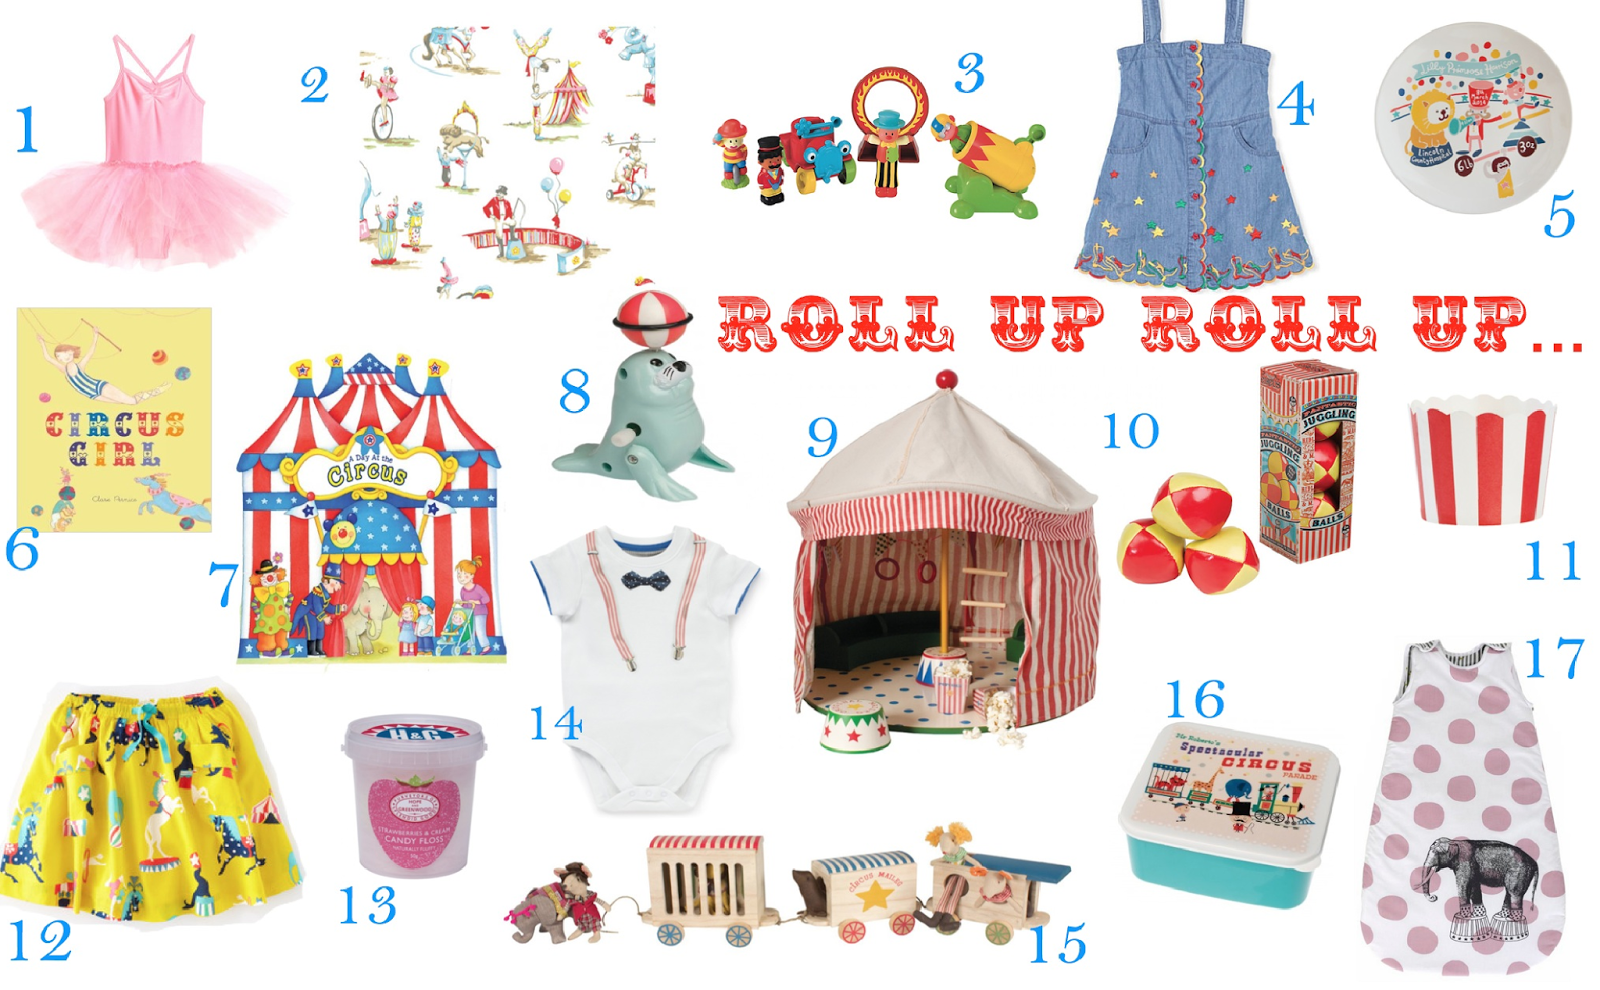 Roll Up, Roll Up…the circus is coming to town! | circus kids buys | cath kidson | alex and alexa | maipeg | stella mccartney | not on the high street | marks and spencer circus | kids circus buys | h&m | kids toys | circus coming to ton mamas Vib | wallpaper ] circus books for kids | personalised plate for baby | circus print skirt | circus wallpaper | circus toys | elc | mothercare |